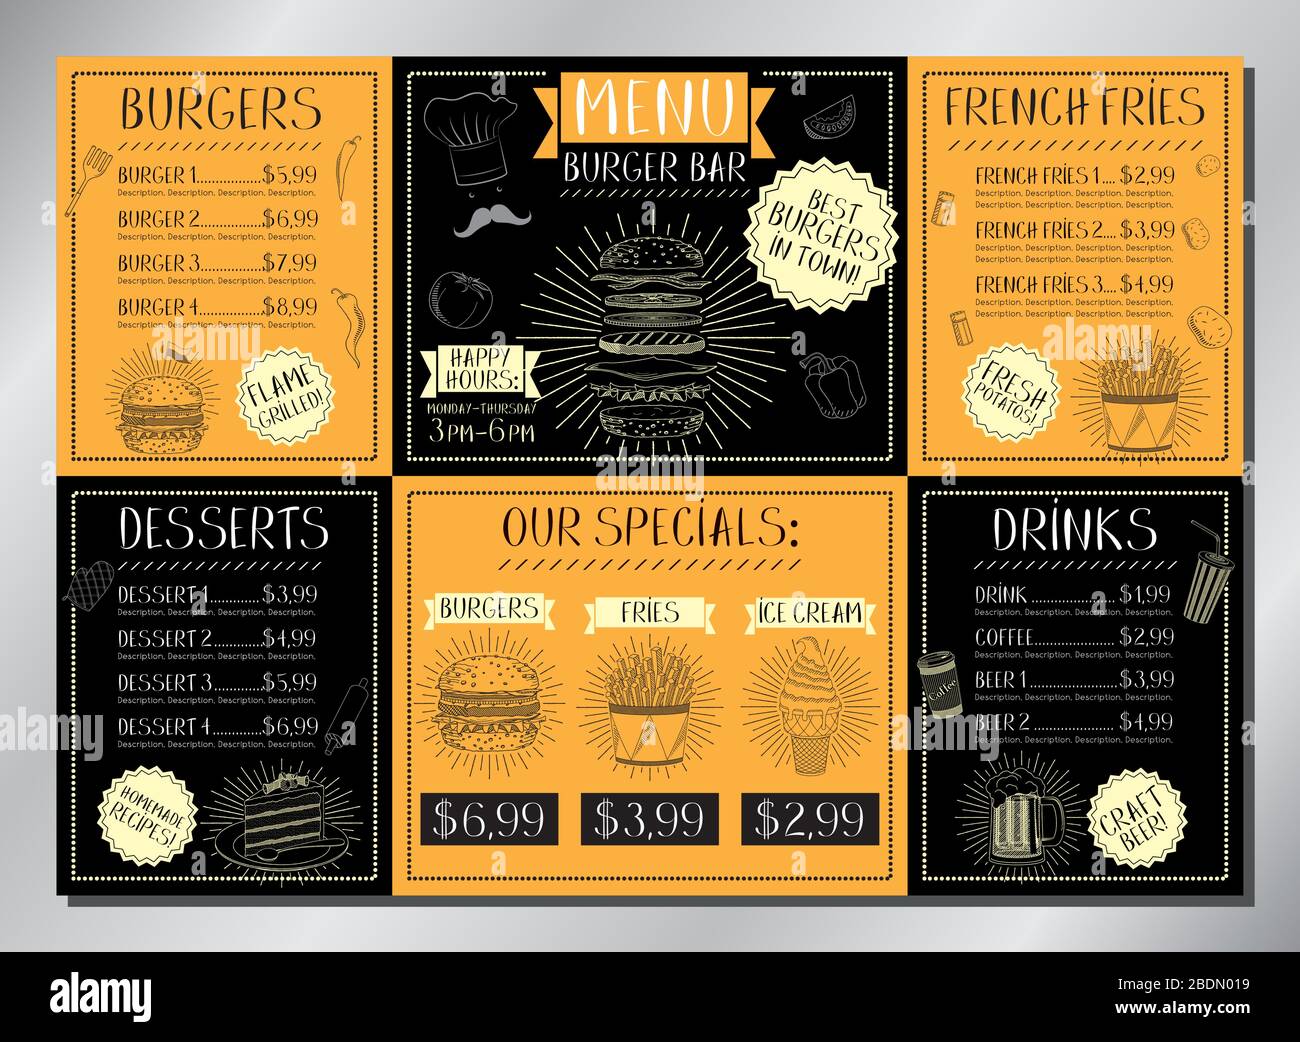 Burger bar card template - table menu (burgers, french fries, desserts, drinks) - A3 size (420x297 mm) Stock Vector